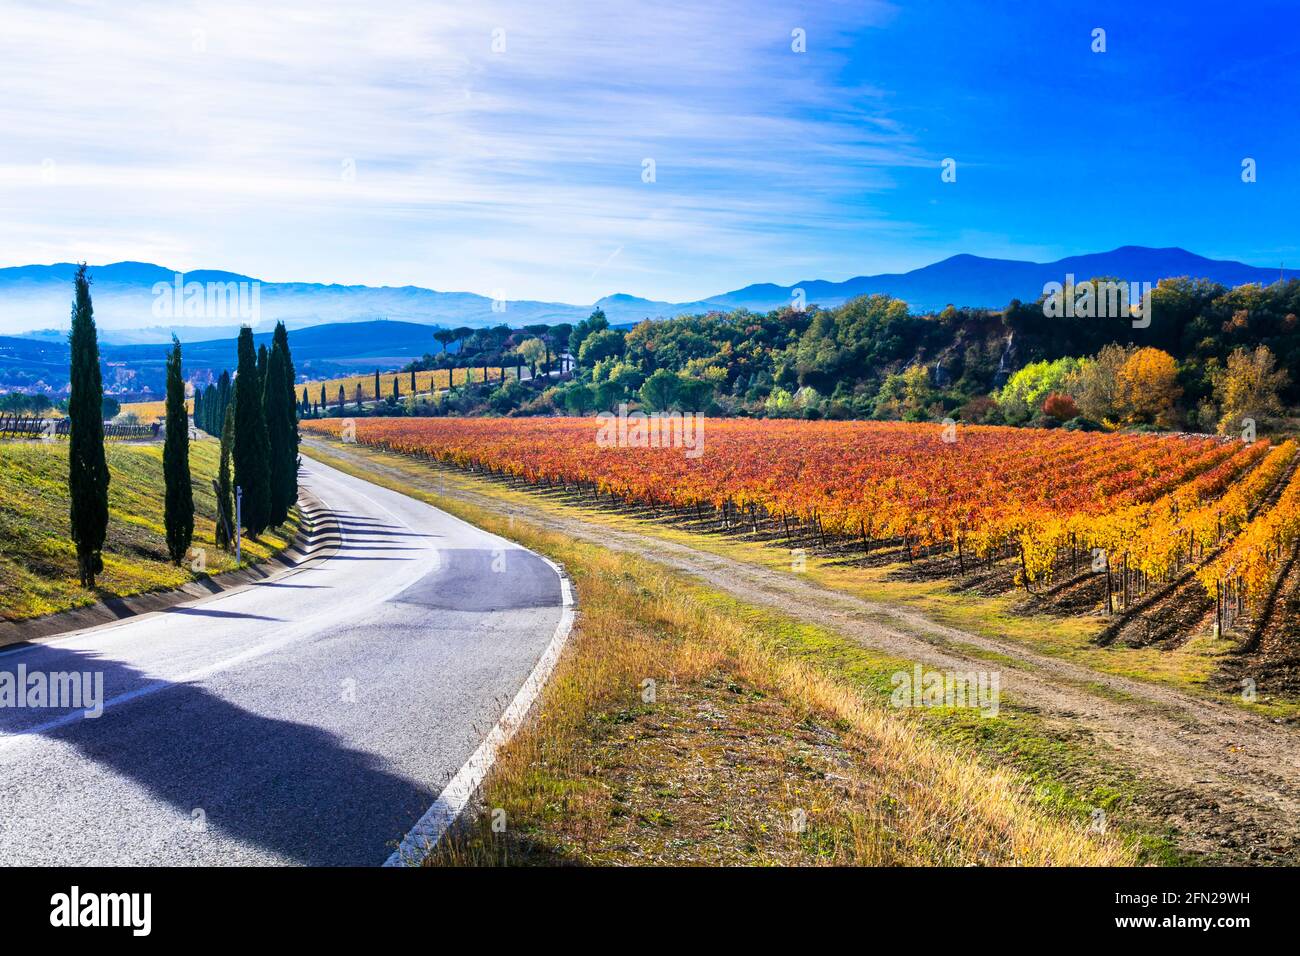 Autumn landscape. Rural scenery of  Tuscany countryside with autumn vineyards and cypresses on the road. Italy travel Stock Photo